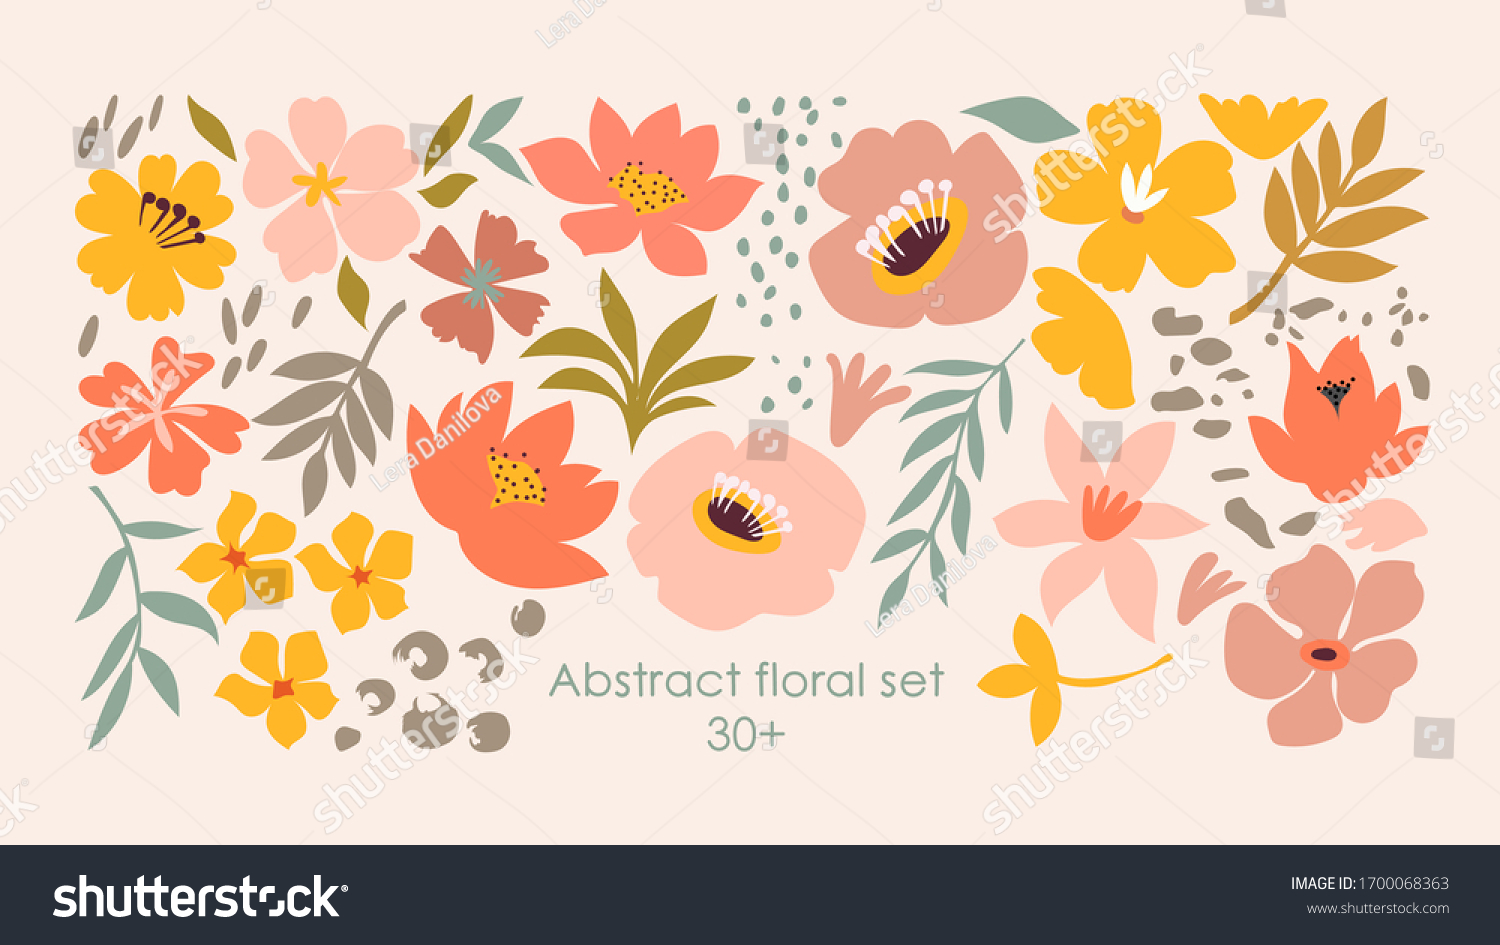 Set of hand drawn shapes and doodle design elements. Exotic jungle leaves, flowers and plants. Abstract contemporary modern trendy vector illustration. Perfect for posters, instagram posts, stickers. #1700068363